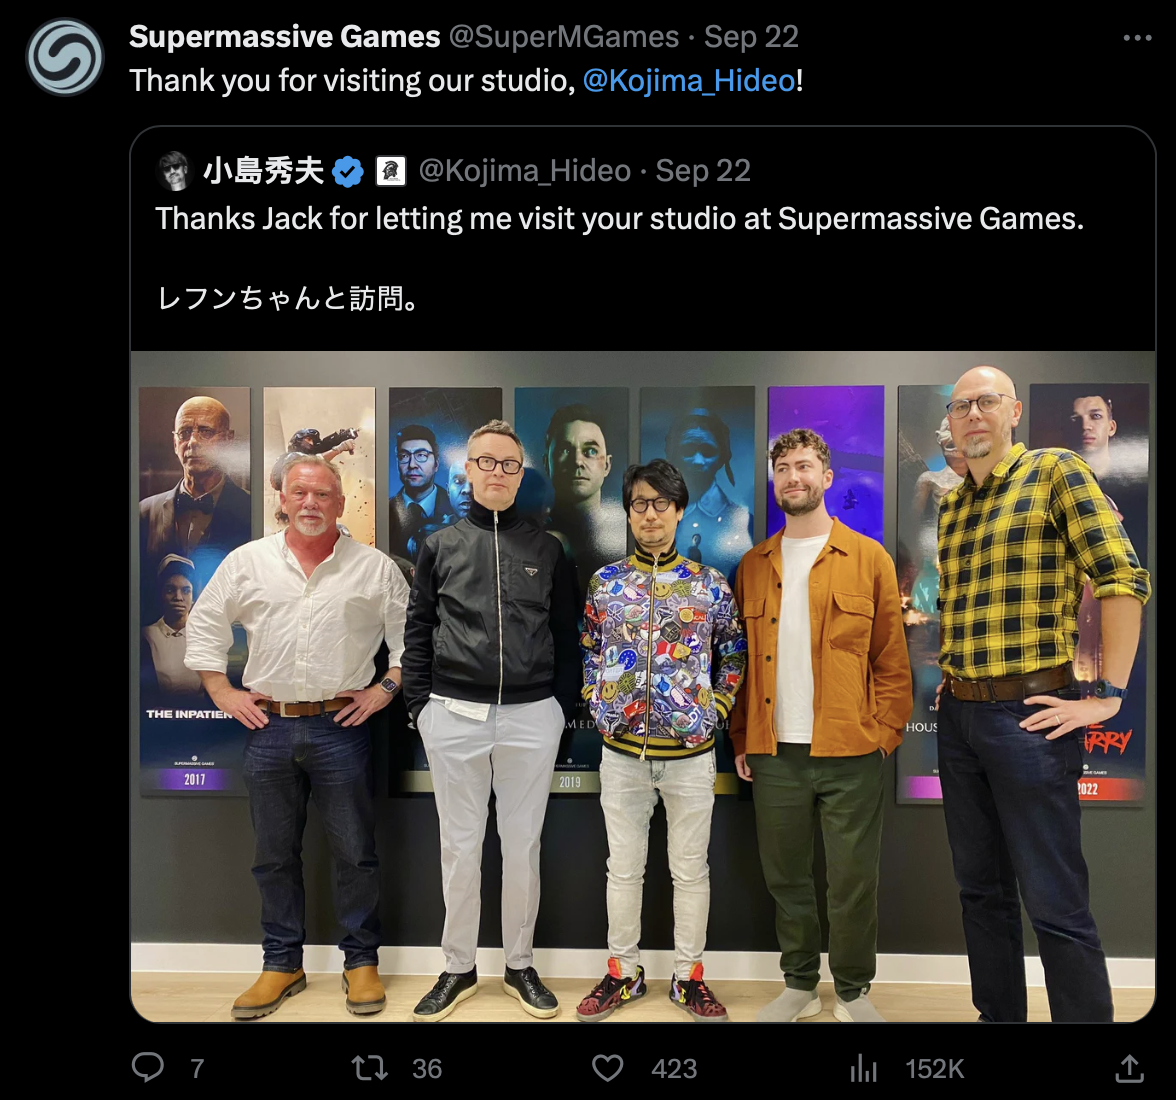 Hideo Kojima and Nicolas Winding with some of the team at Supermassive Games